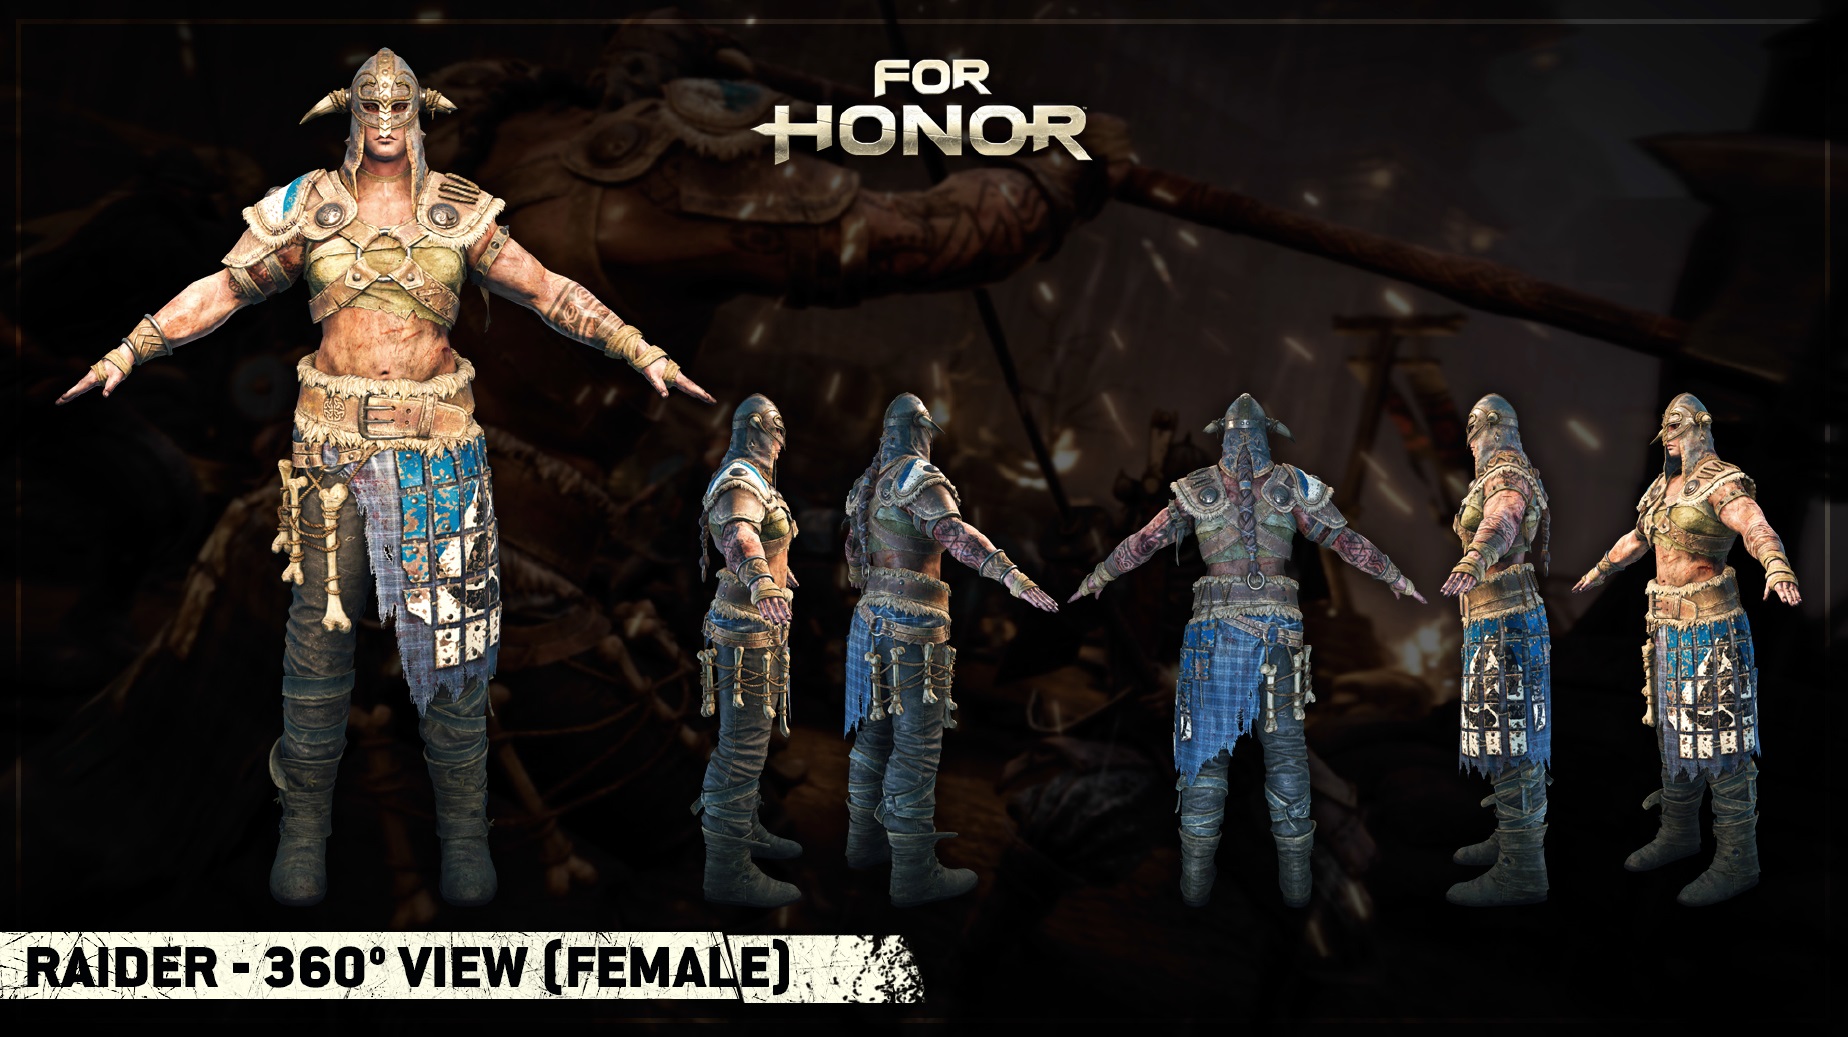 For Honor Raider Armor Sets.